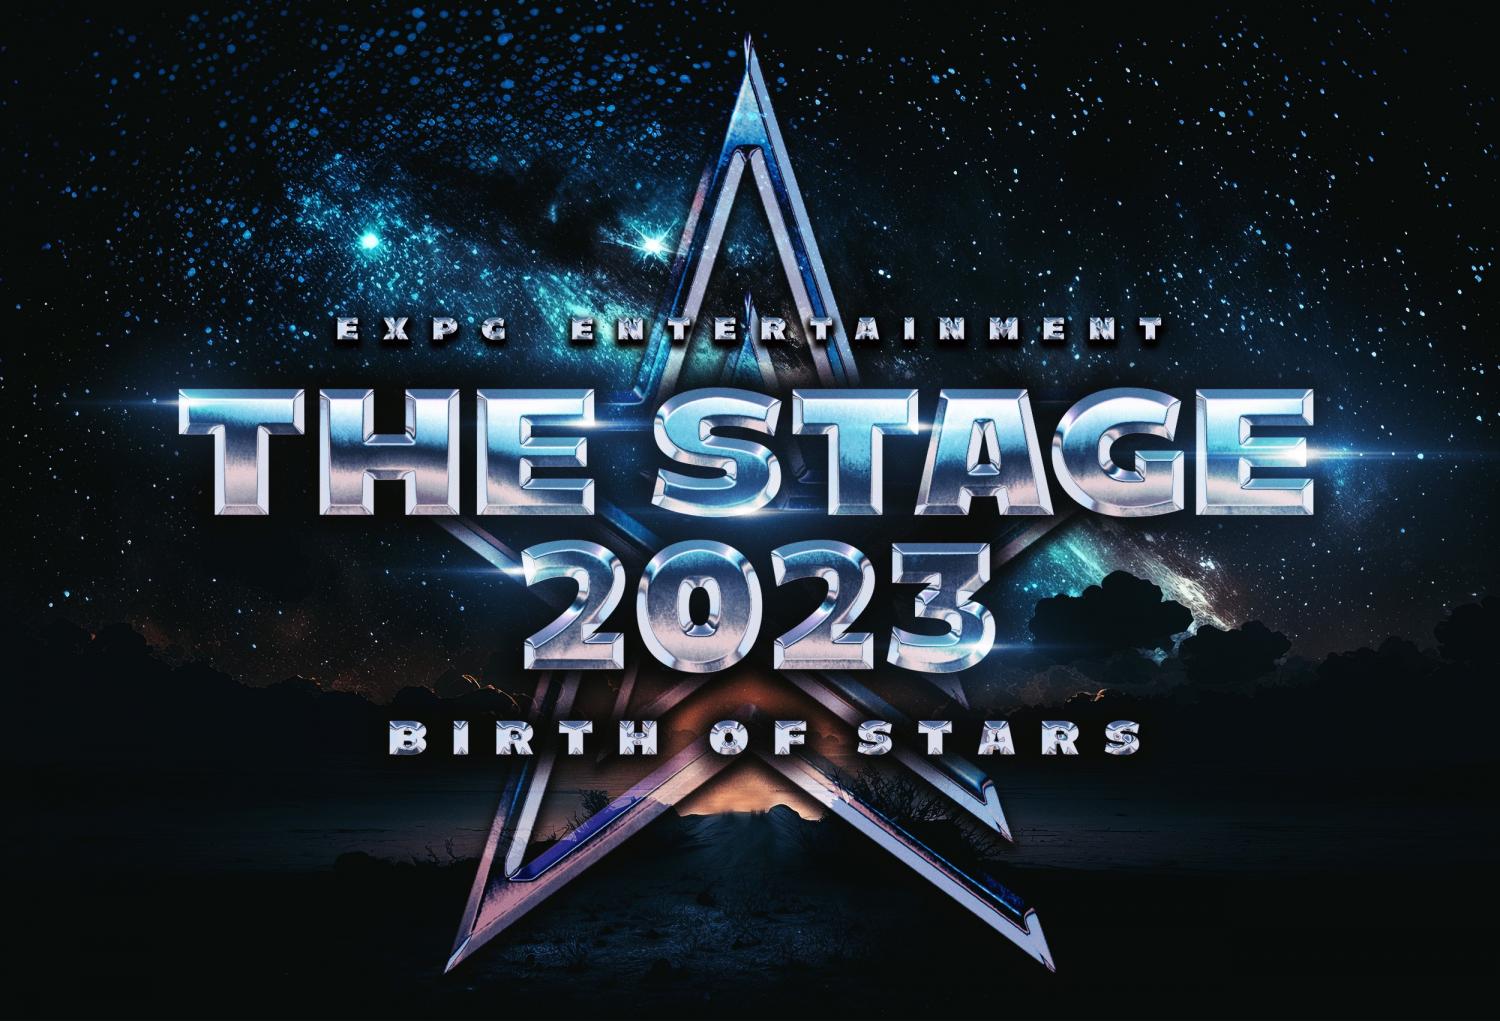 EXPG ENTERTAINMENT THE STAGE 2023